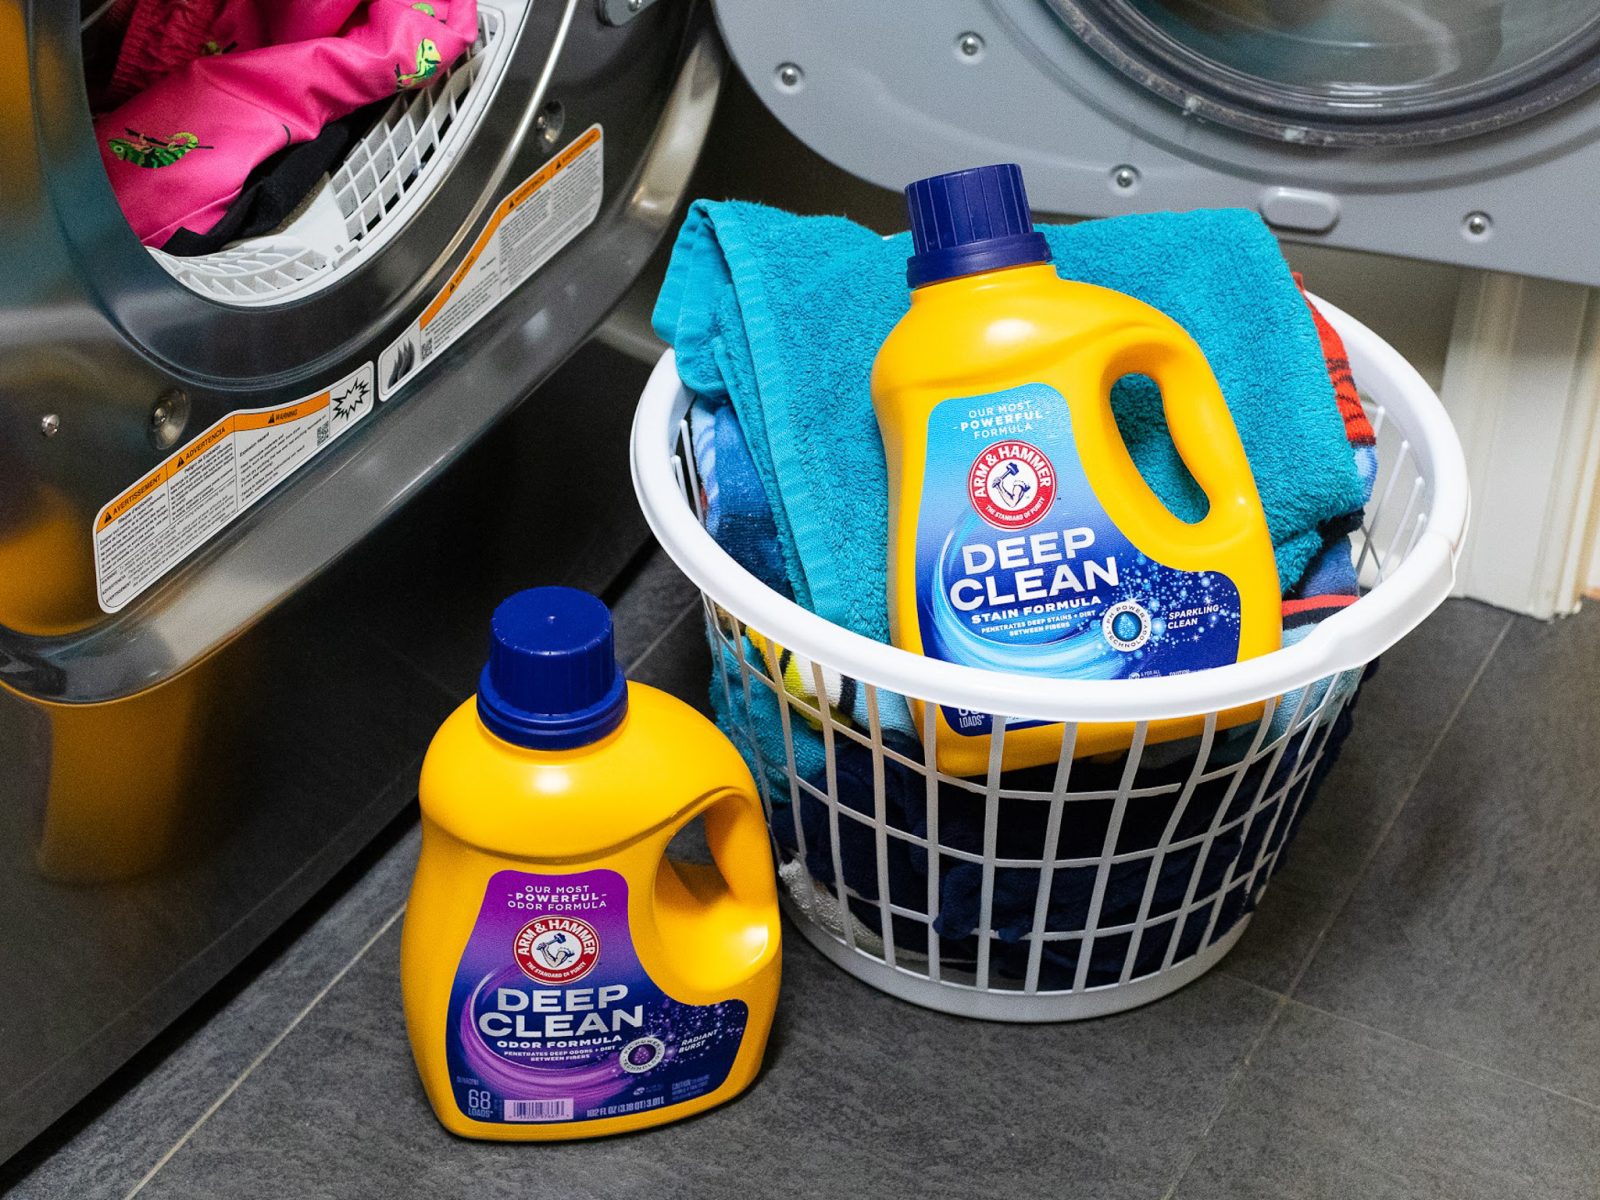 Get ARM & HAMMER Deep Clean For Just $5.99 At Kroger – Less Than Half Price!